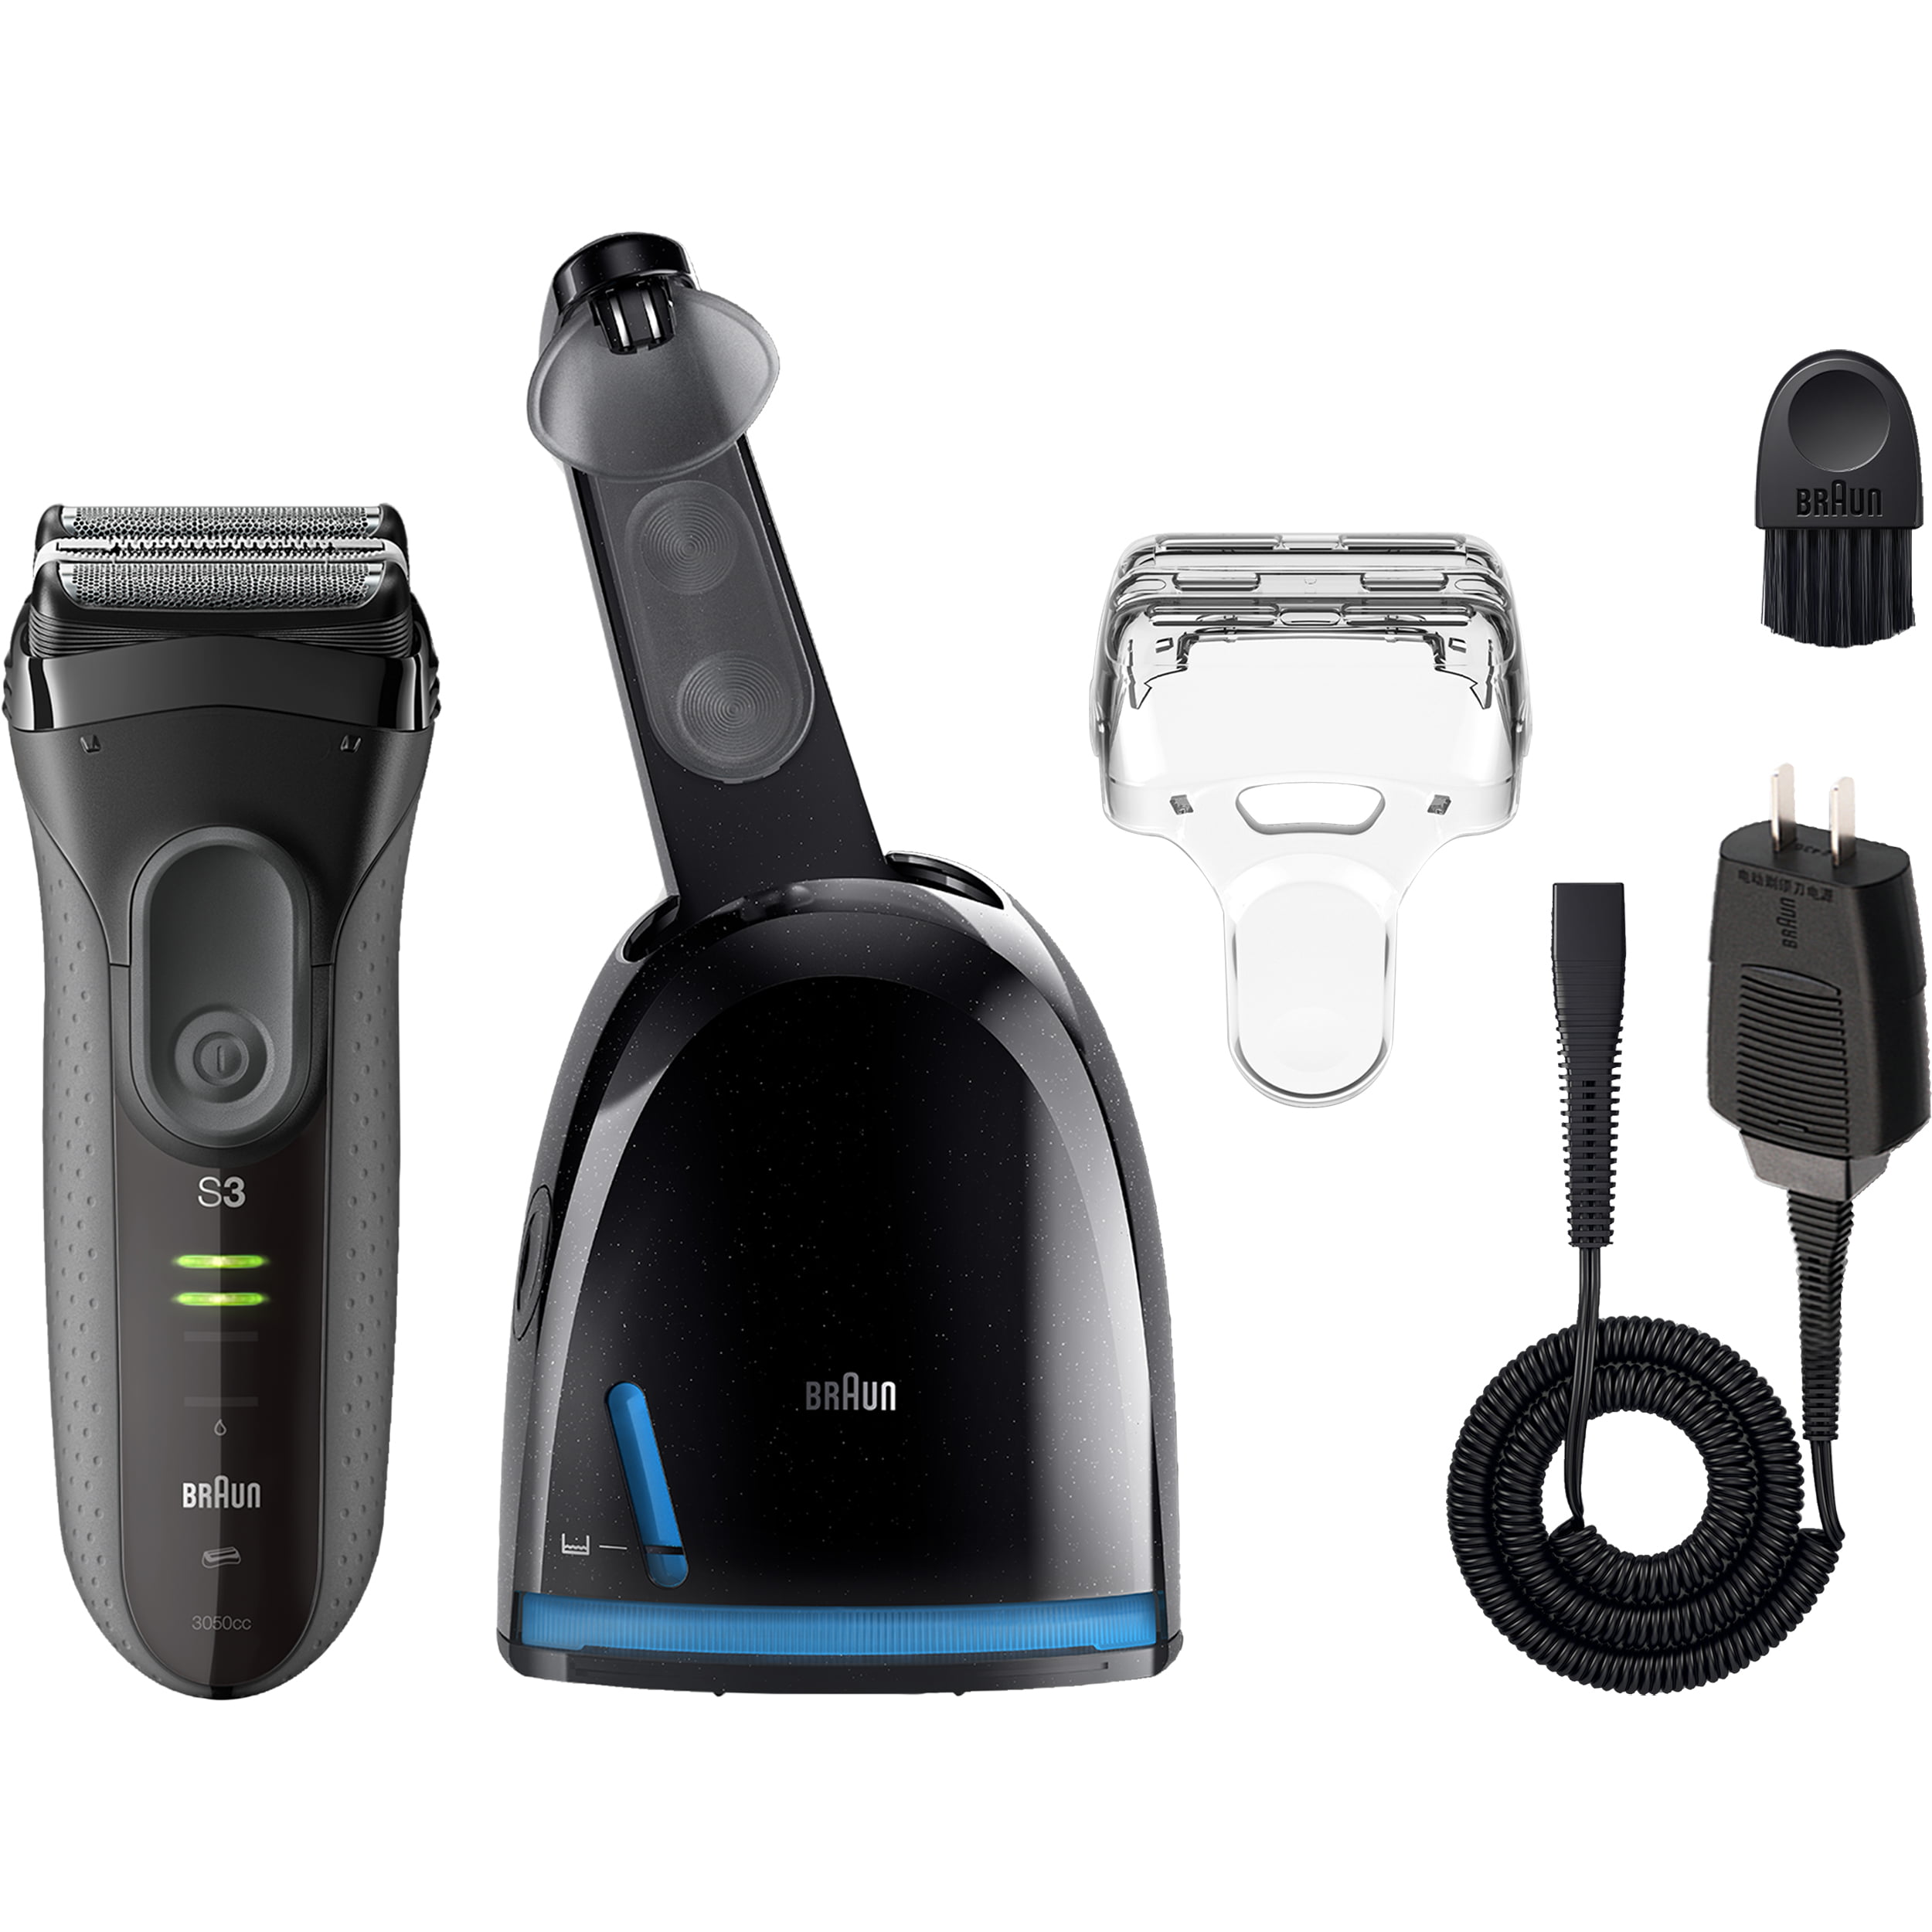 Clean Braun Shaver, Series 3050cc Dry Station Wet Electric 3 ProSkin